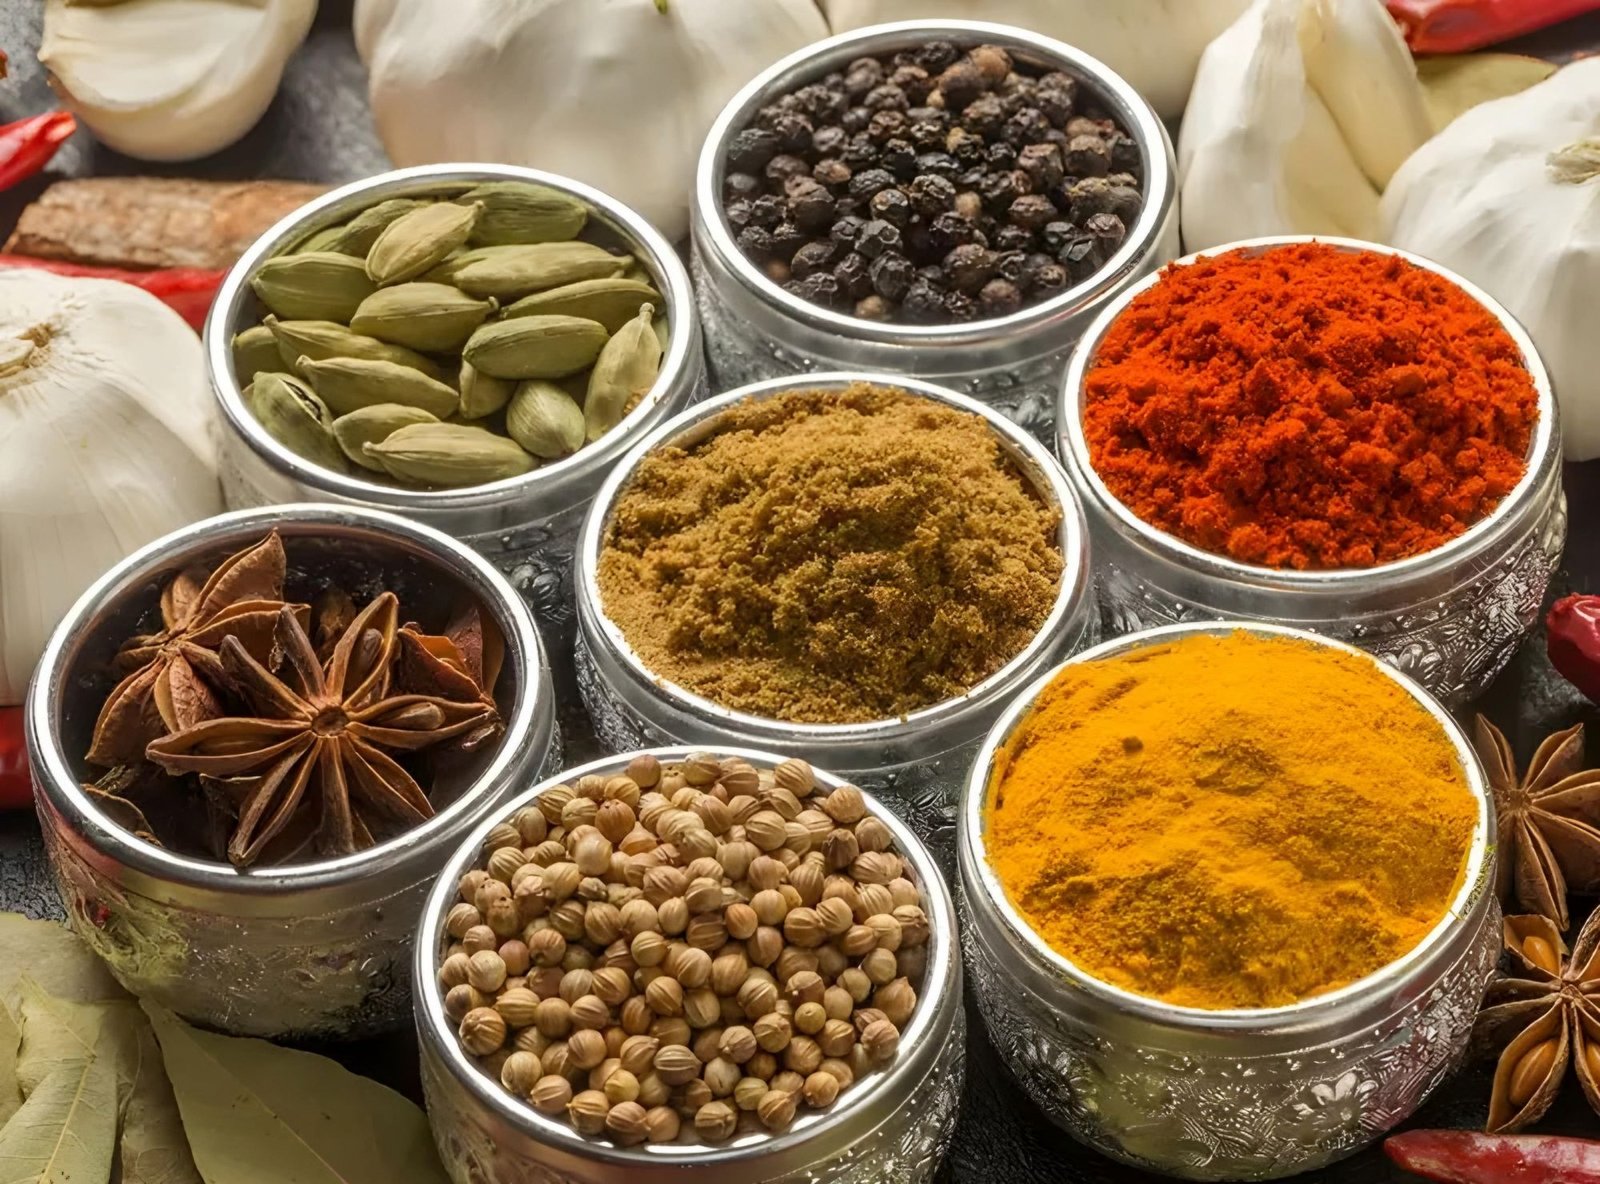 Cancer Therapy with Indian Spices Patented by IIT-Madras